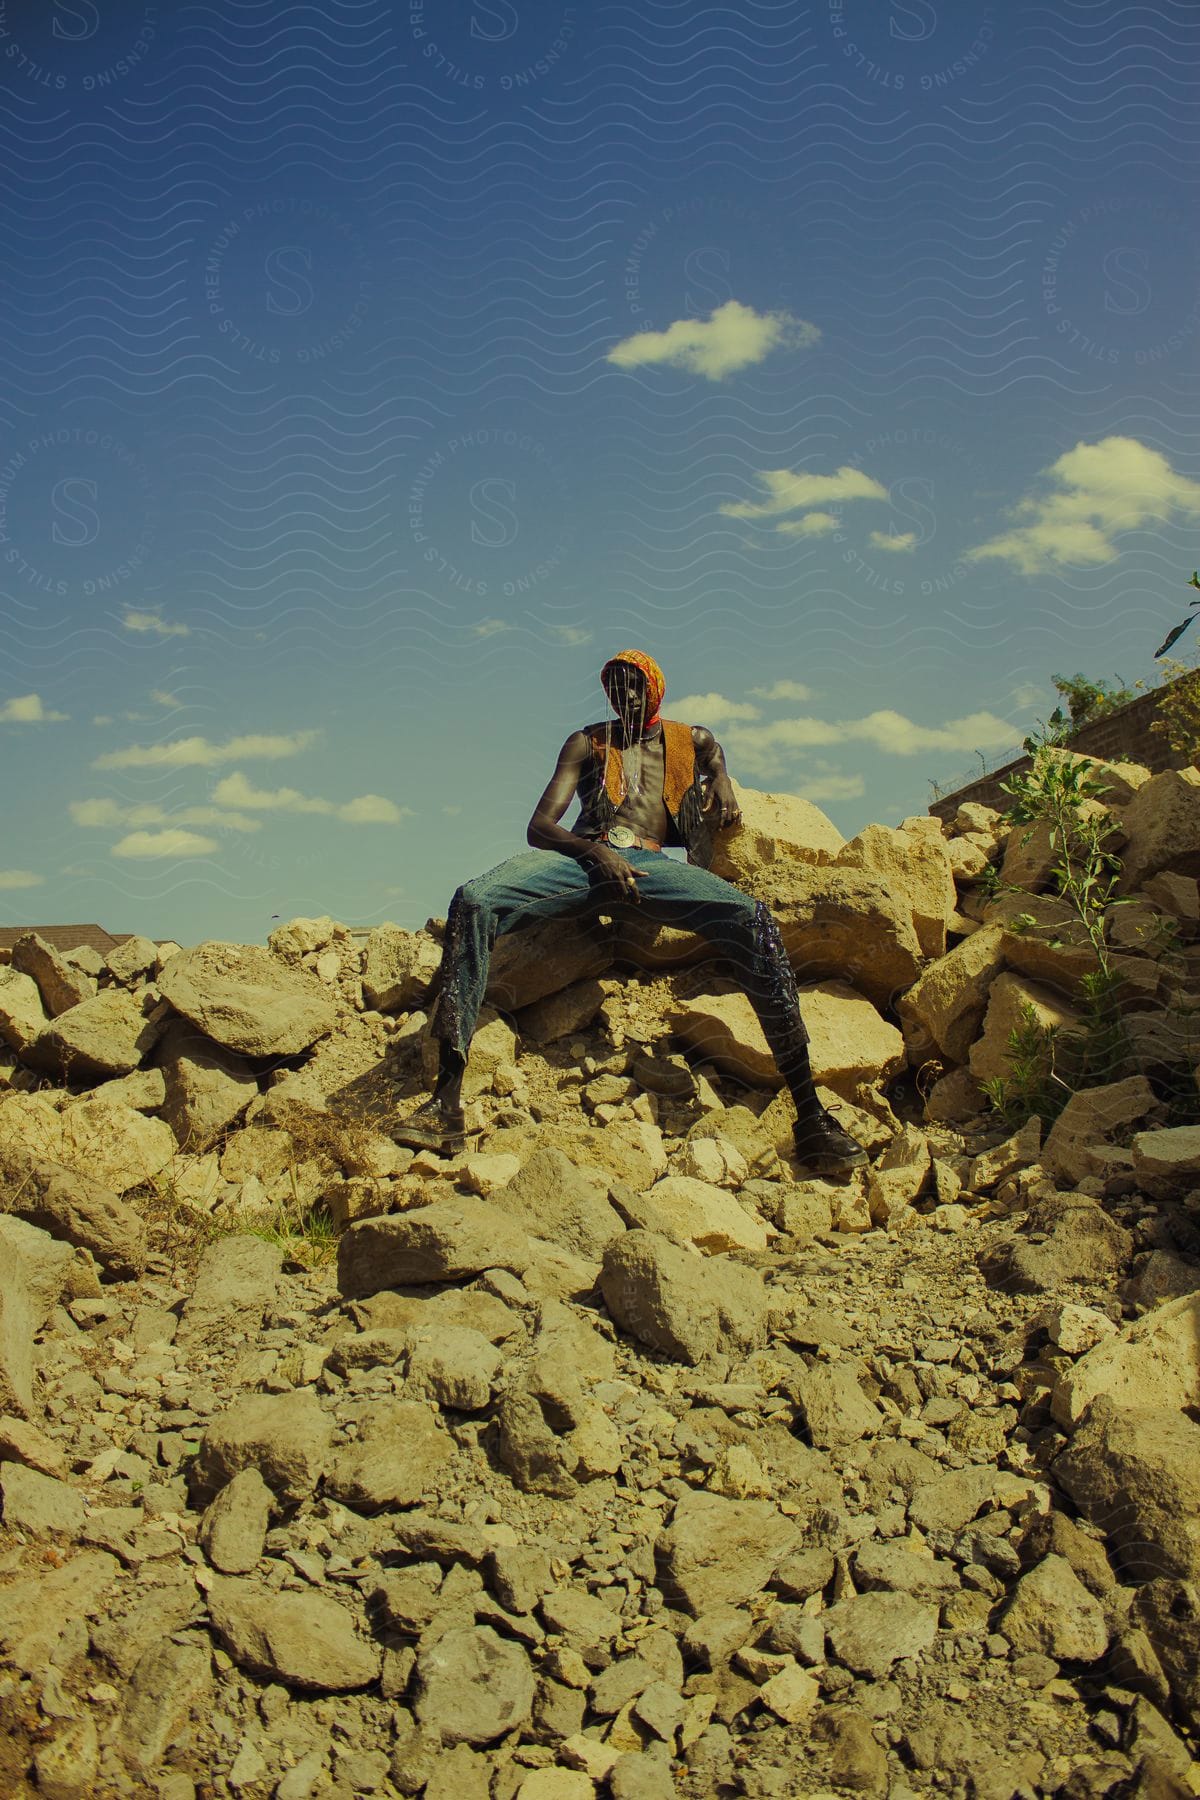 Man with jeans sitting on rocks in an open-air environment